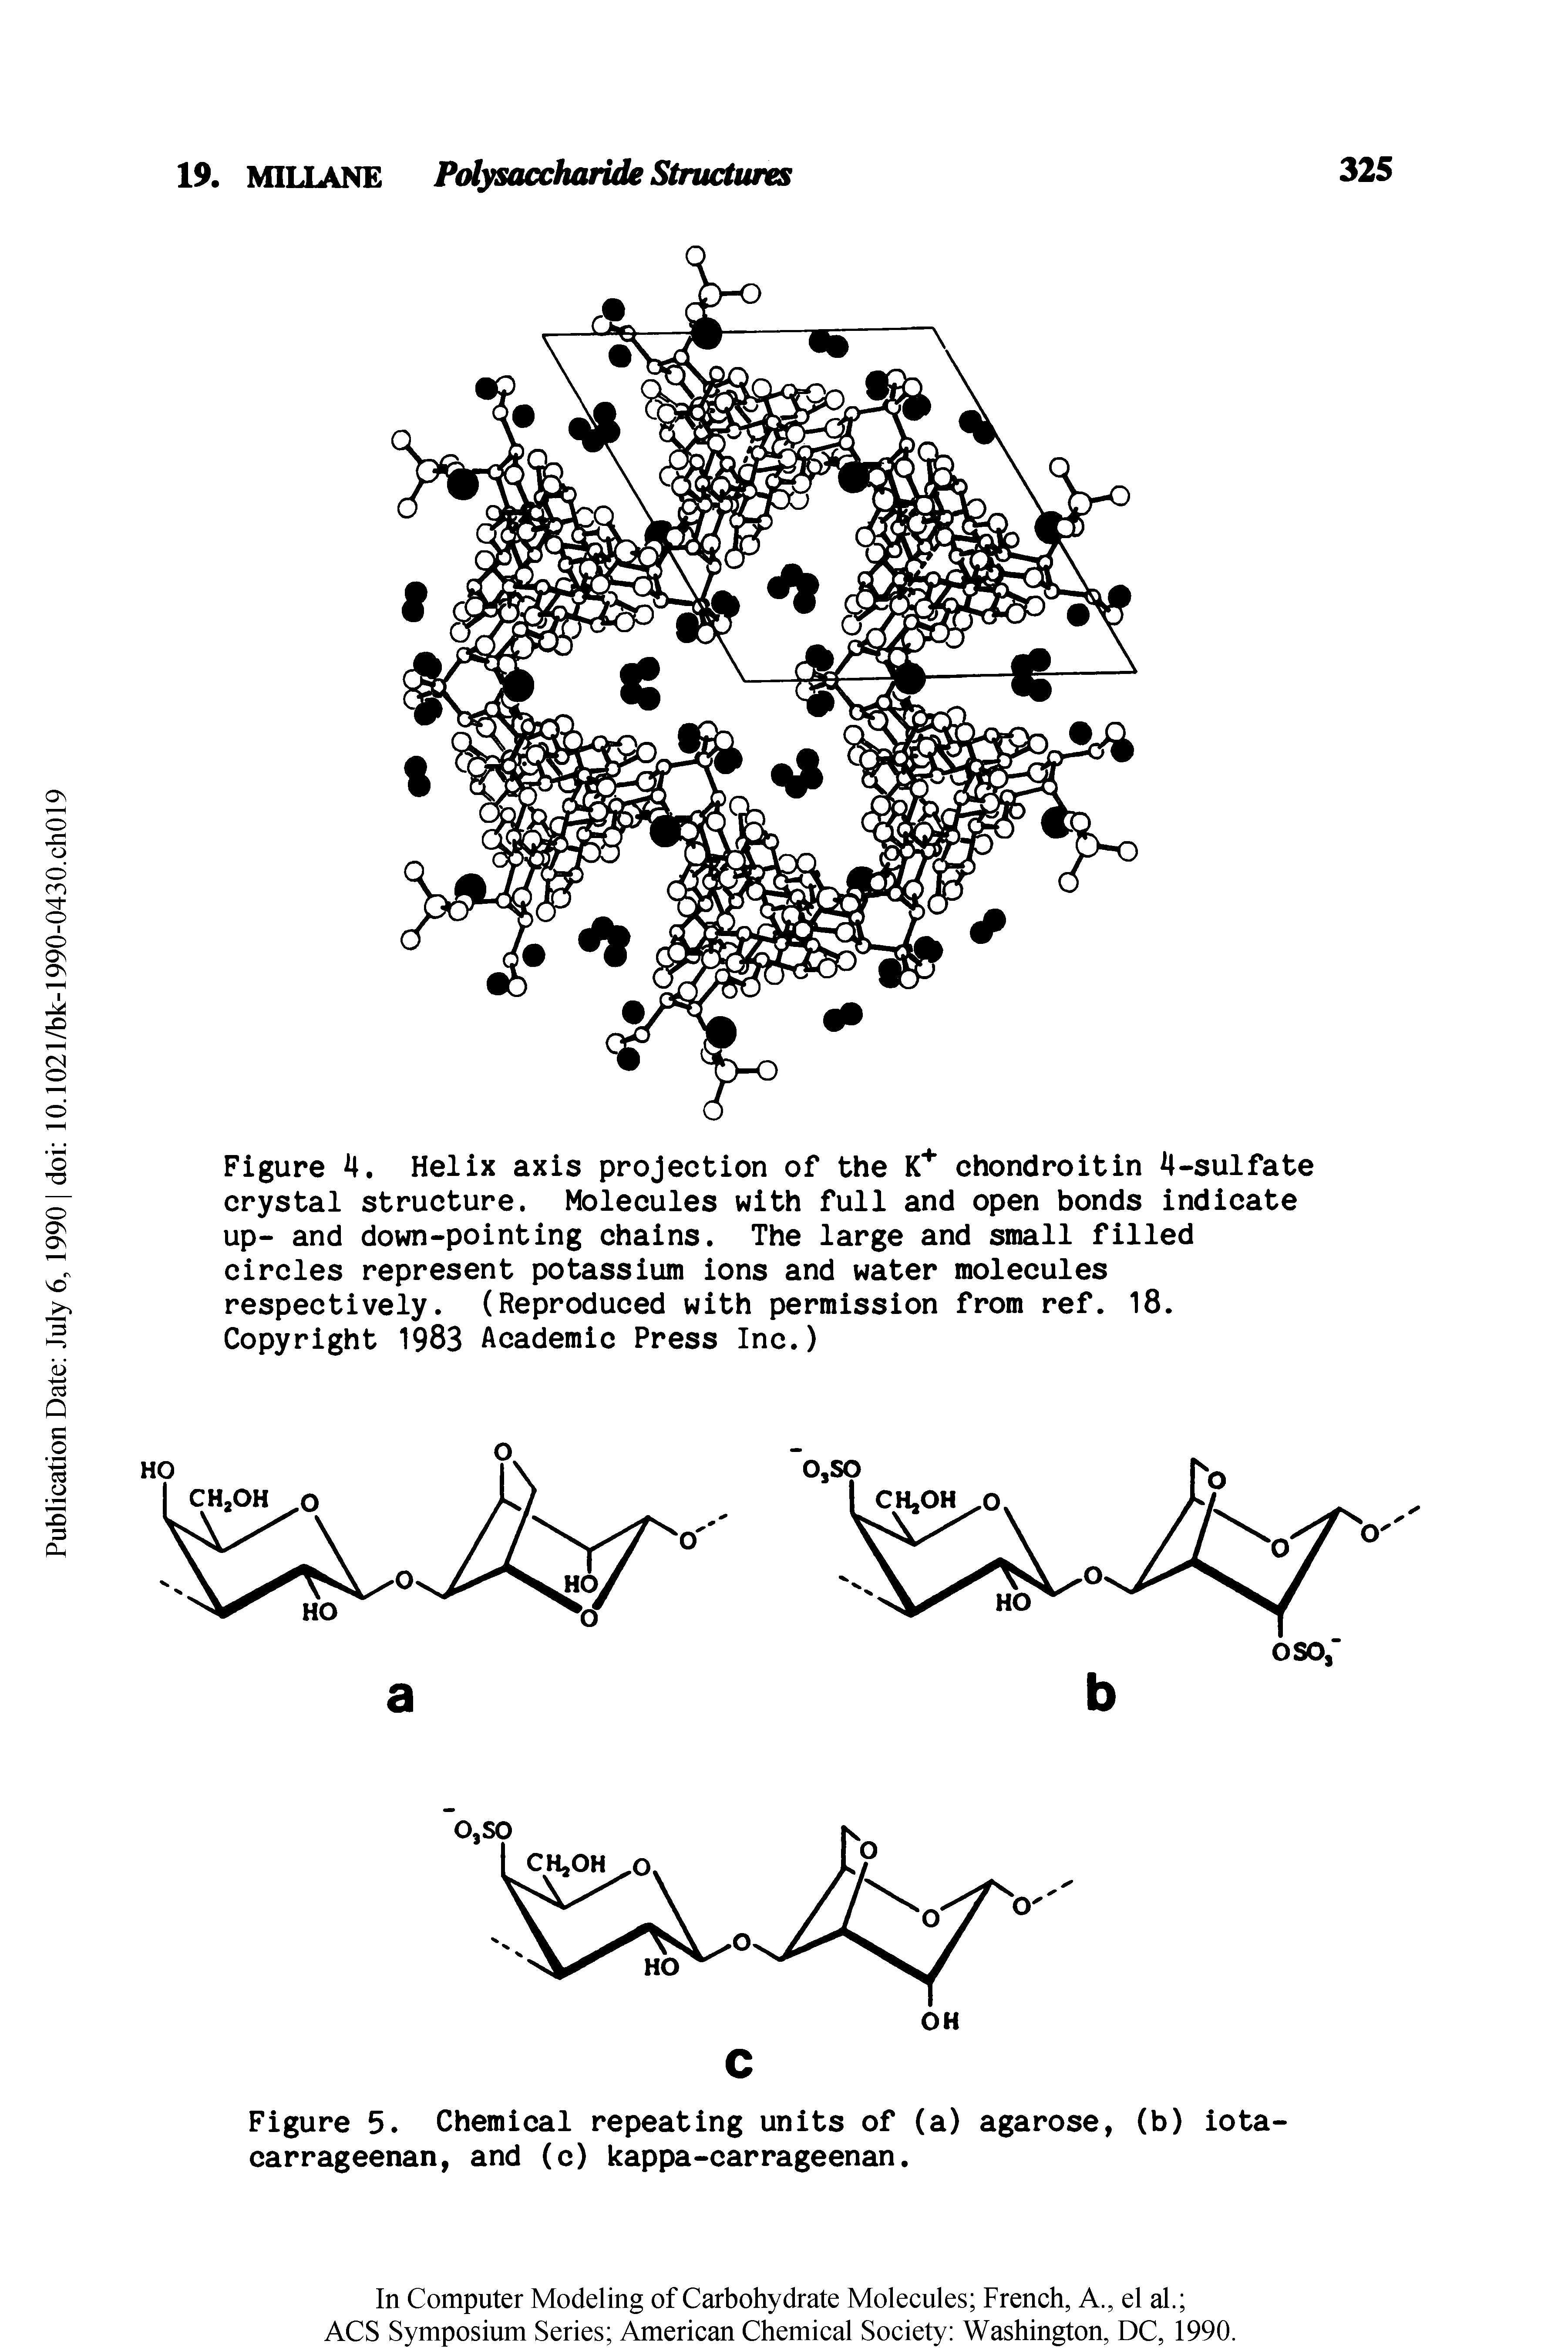 Figure 4. Helix axis projection of the chondroitin 4-sulfate crystal structure. Molecules with full and open bonds indicate up- and down-pointing chains. The large and small filled circles represent potassium ions and water molecules respectively. (Reproduced with permission from ref. 18. Copyright 1983 Academic Press Inc.)...